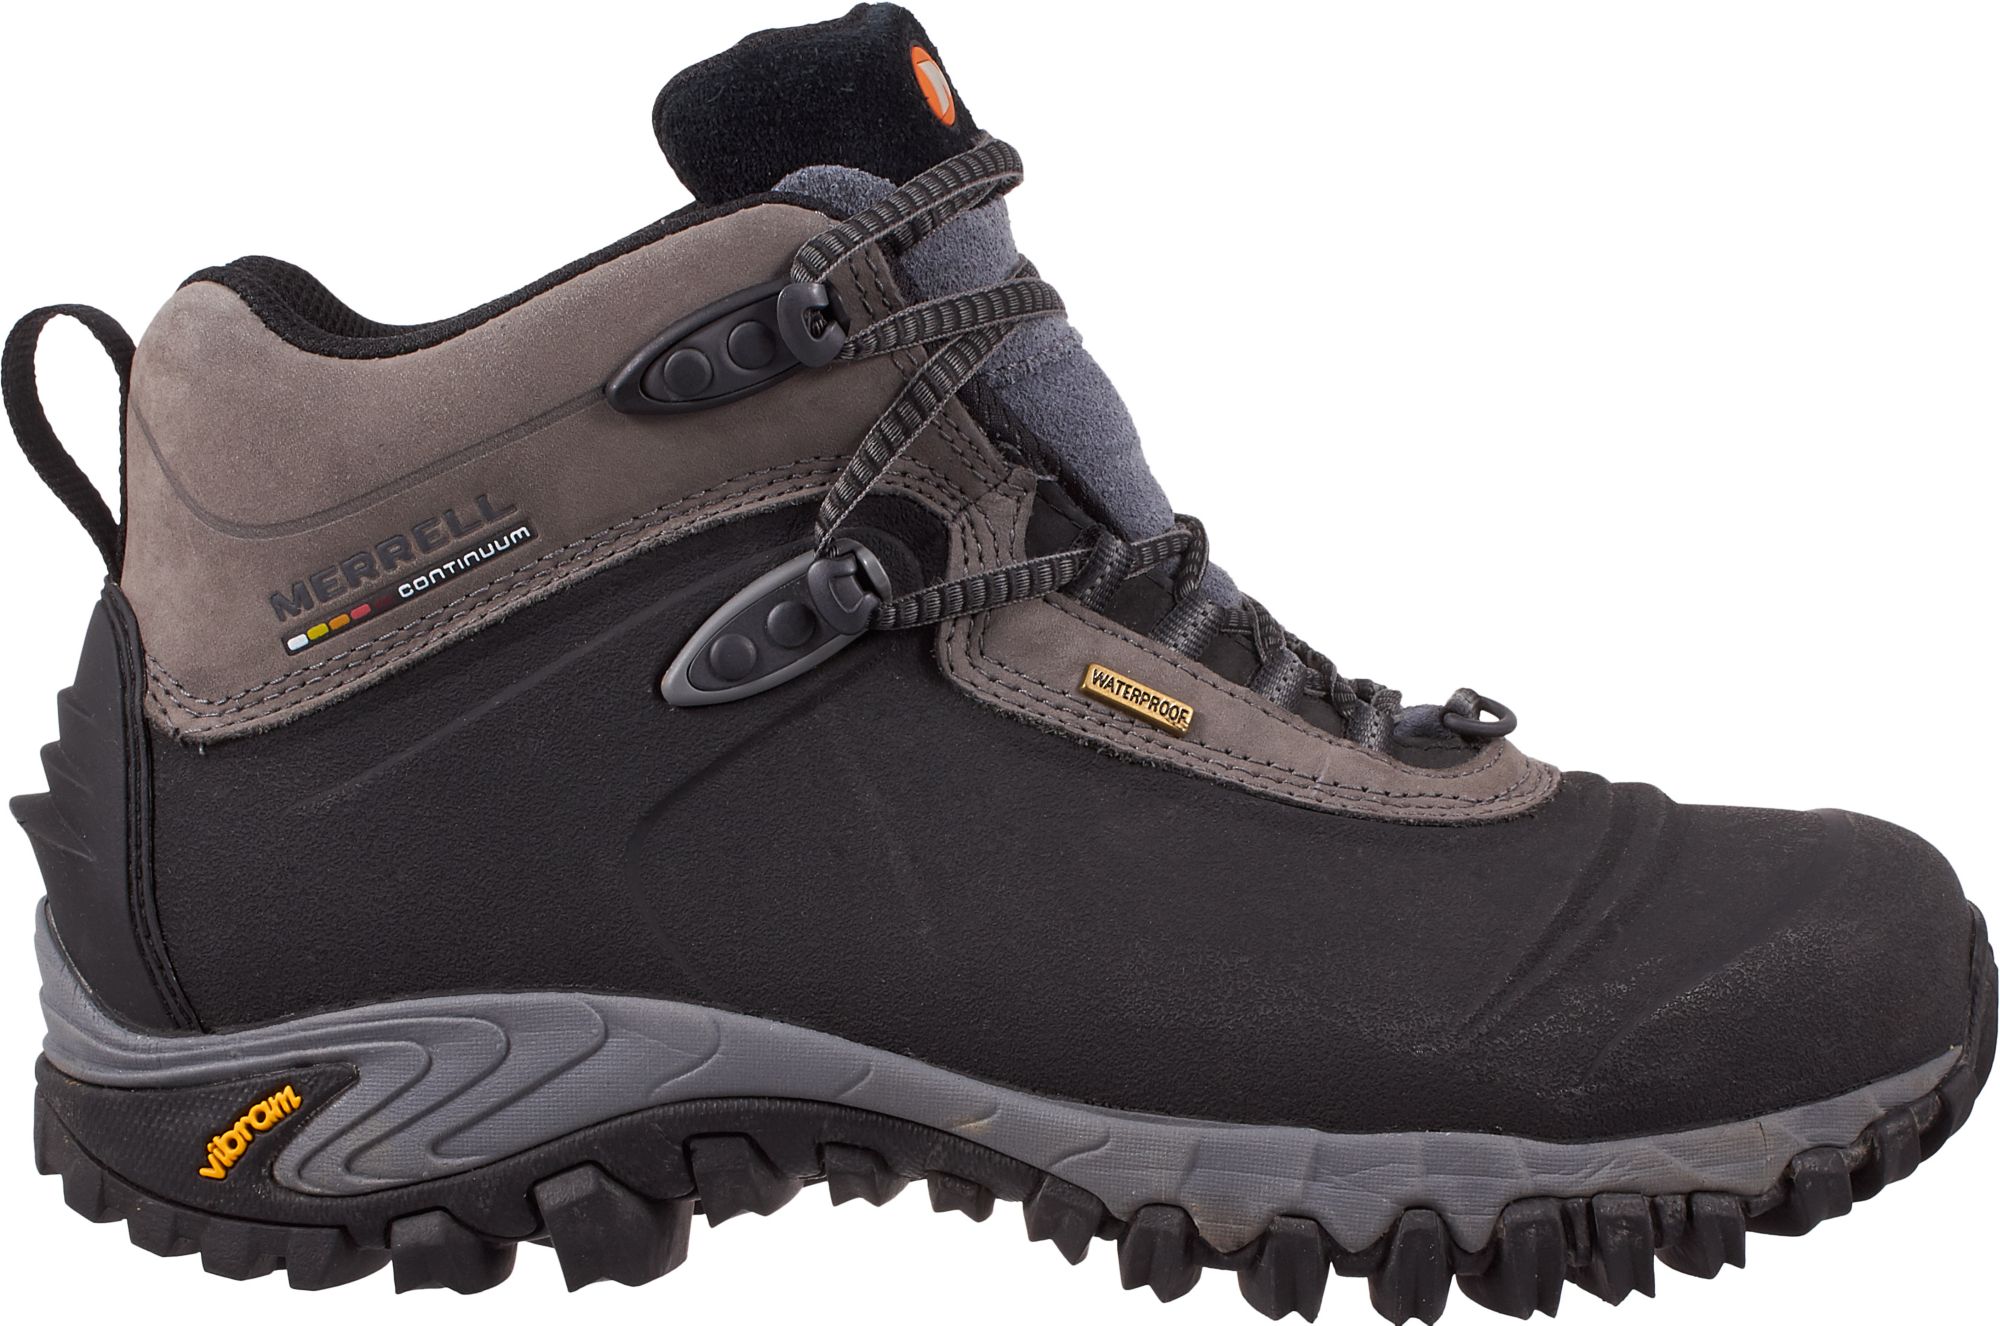 merrell men's thermo 6 shell wp winter boots